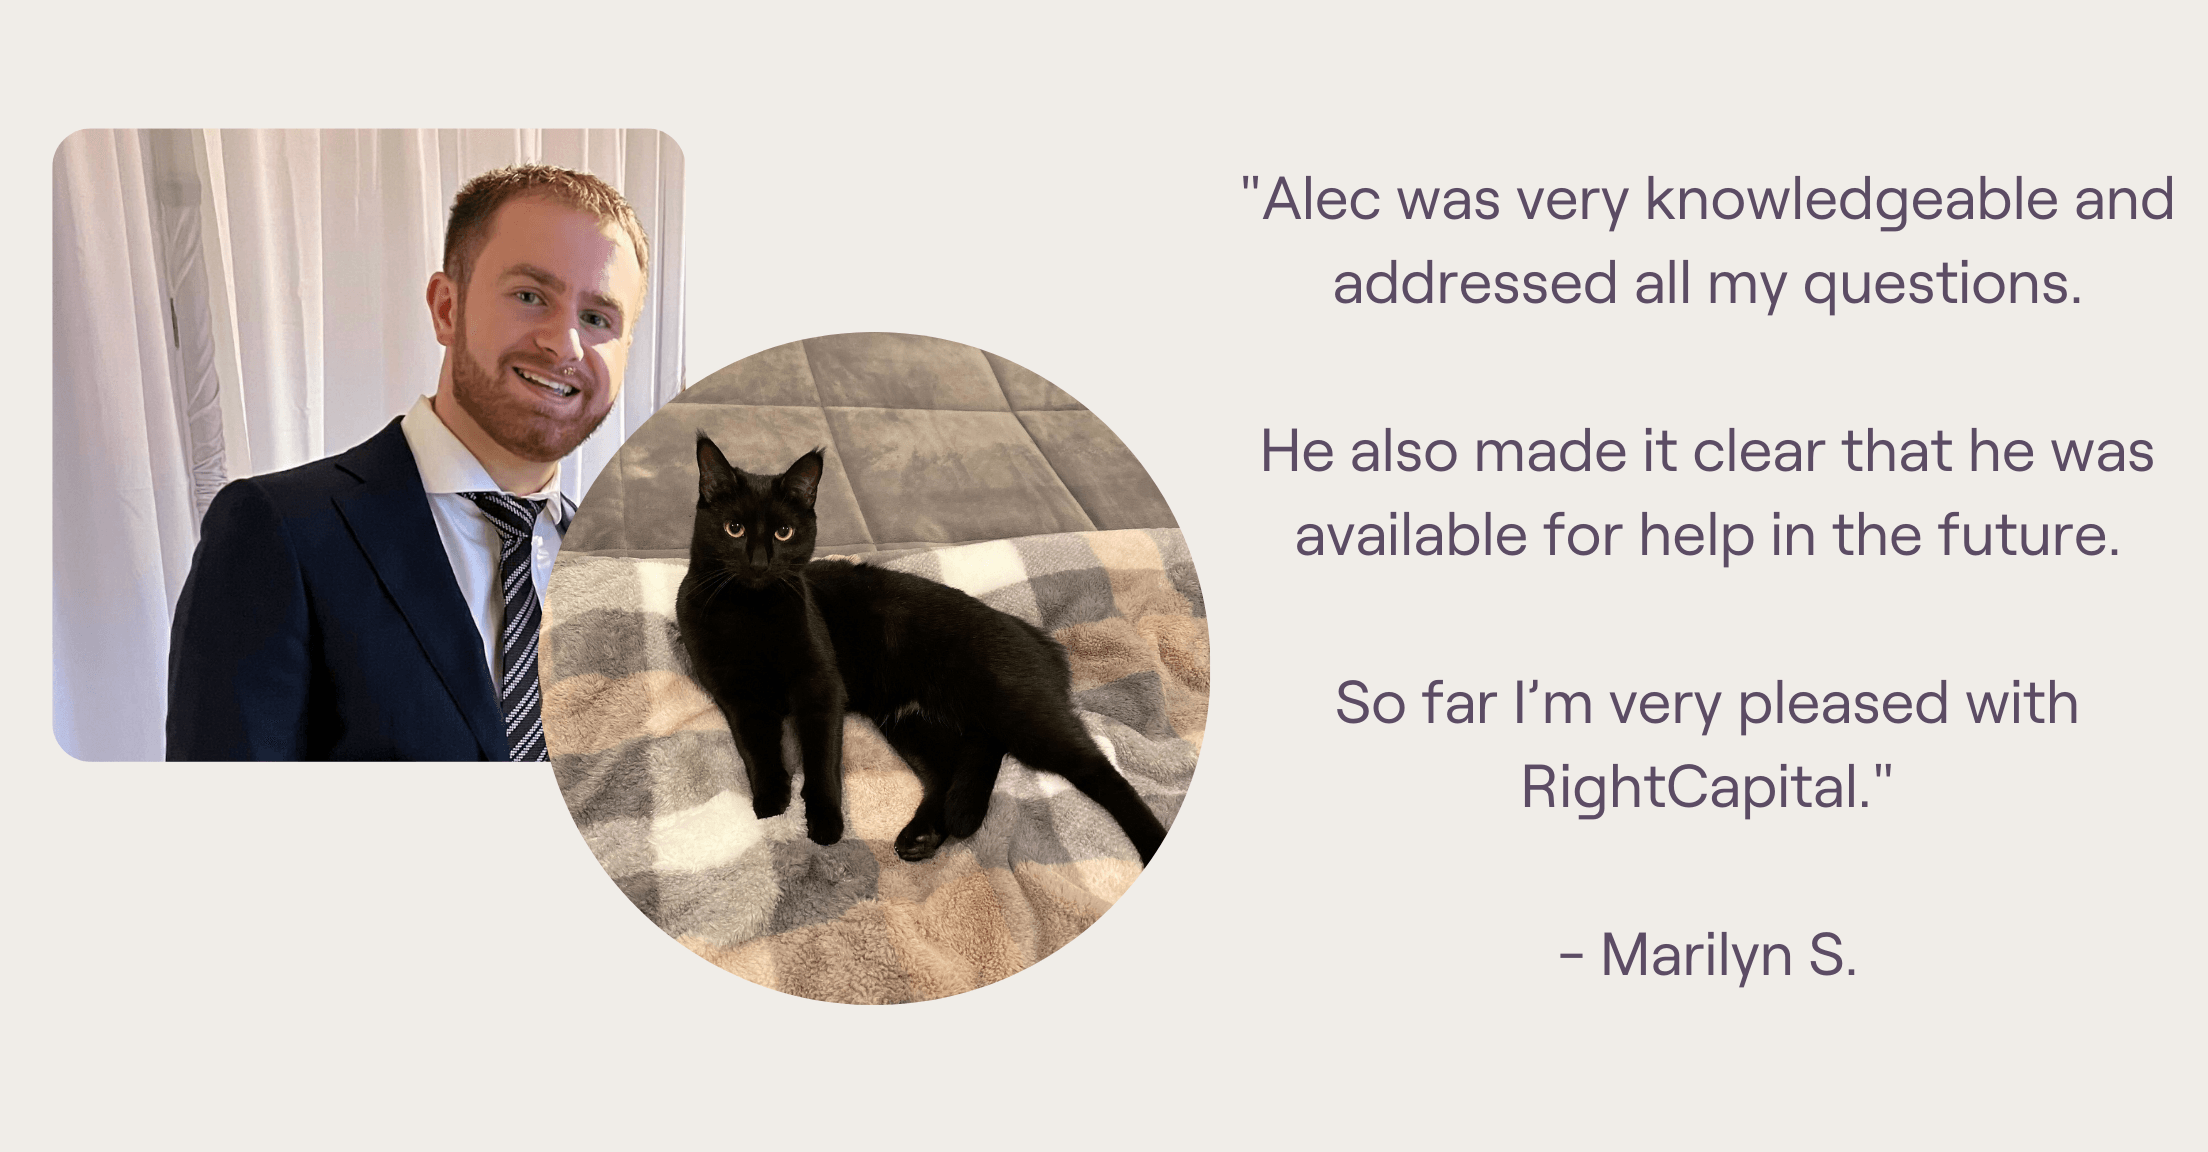 RightCapital's Alec and his cat, next to an advisor review that he is very knowledgeable and addressed all questions